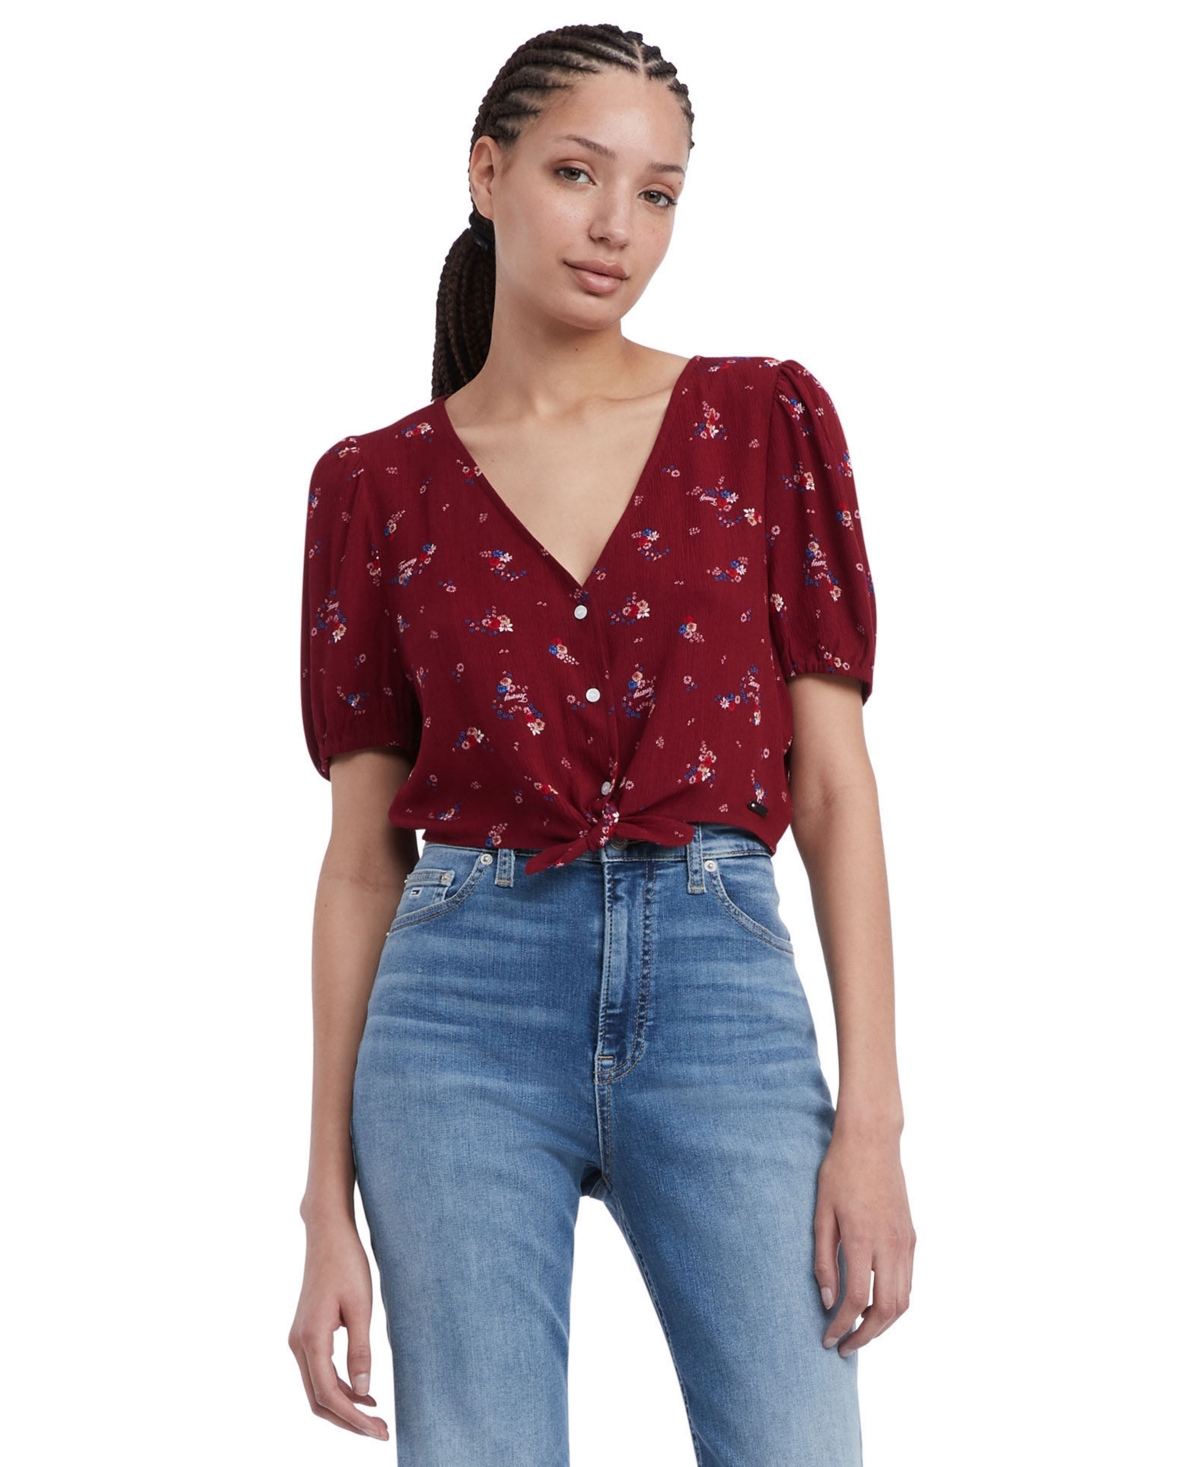 Women's Floral Balloon-Sleeve Tie-Front Blouse - MOUNTAIN FLORAL